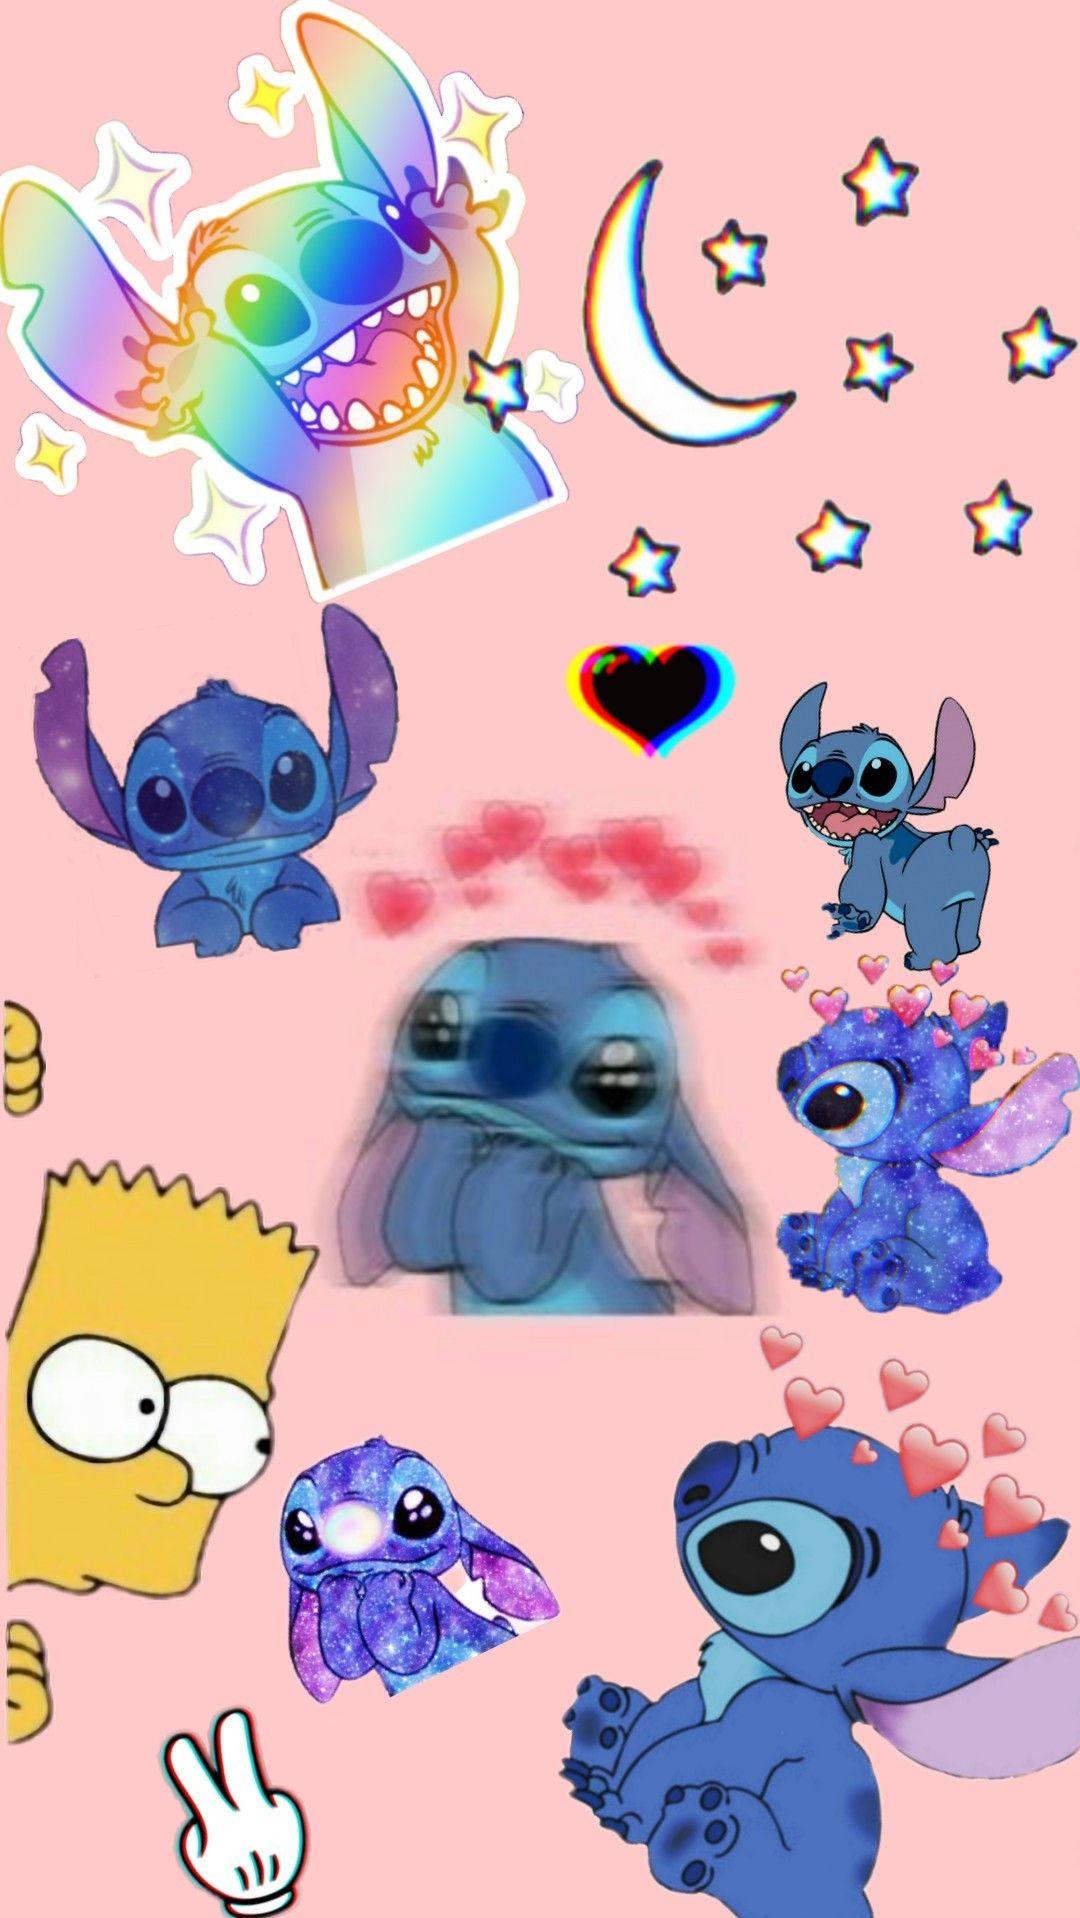 Fun and Cute Stitch Wallpapers : Stitch OHANA Wallpaper for Desktop I Take  You | Wedding Readings | Wedding Ideas | Wedding Dresses | Wedding Theme